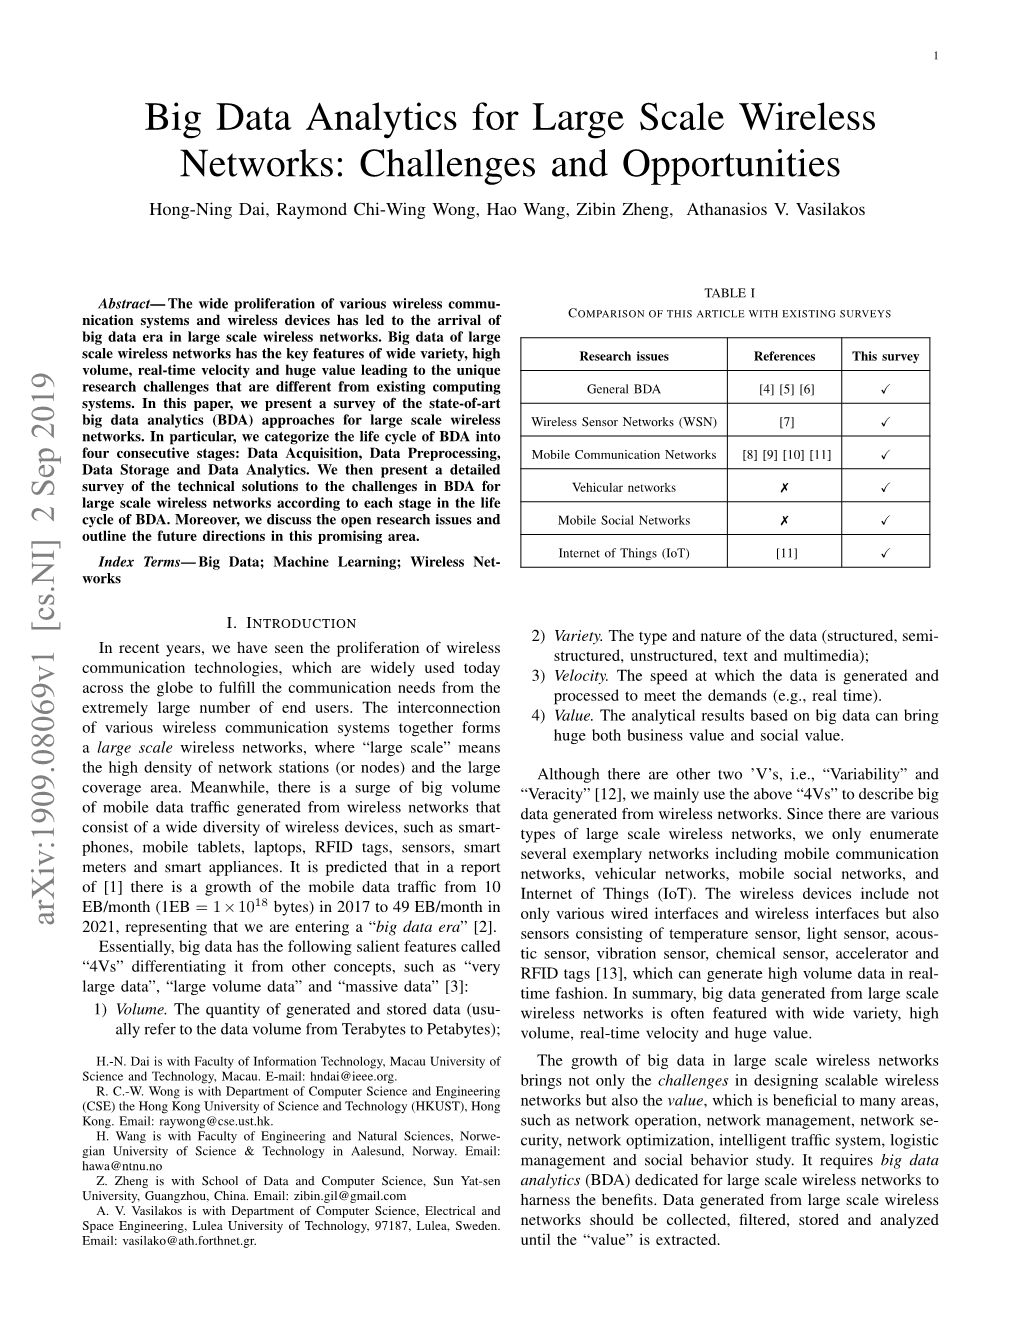 Big Data Analytics for Large Scale Wireless Networks: Challenges and Opportunities Hong-Ning Dai, Raymond Chi-Wing Wong, Hao Wang, Zibin Zheng, Athanasios V